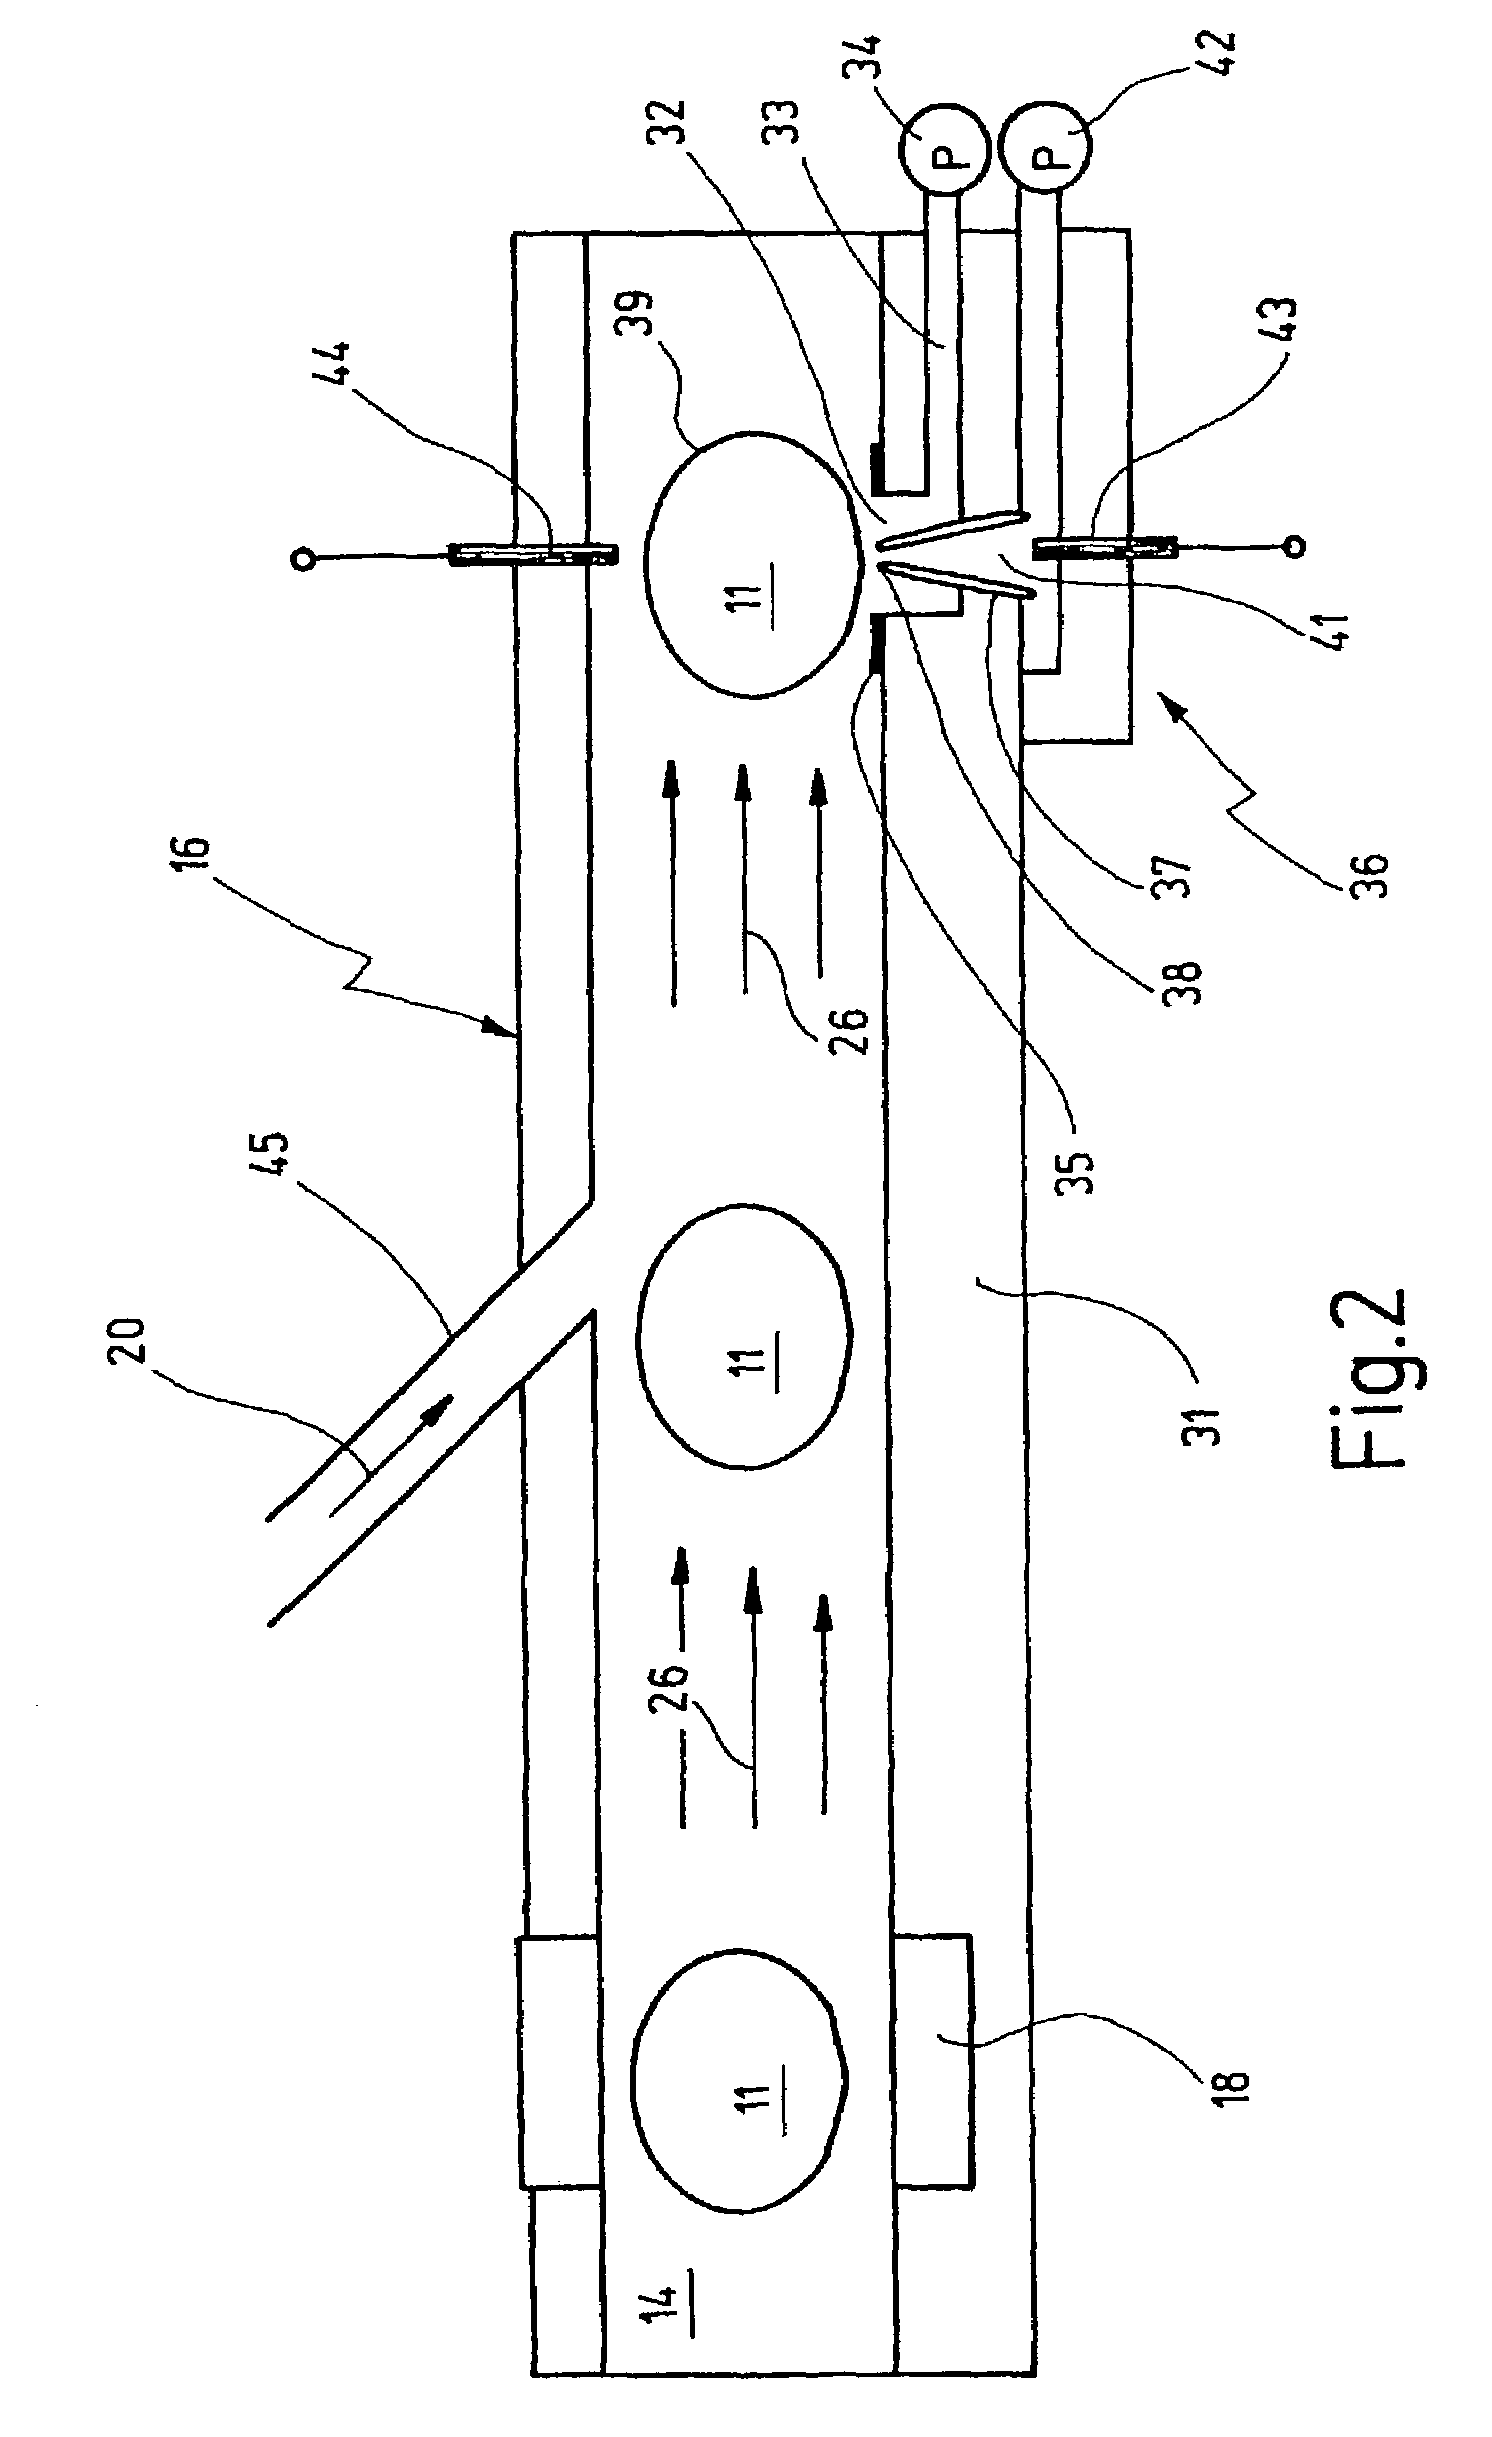 Apparatus and method for electrically contacting biological cells suspended in a liquid